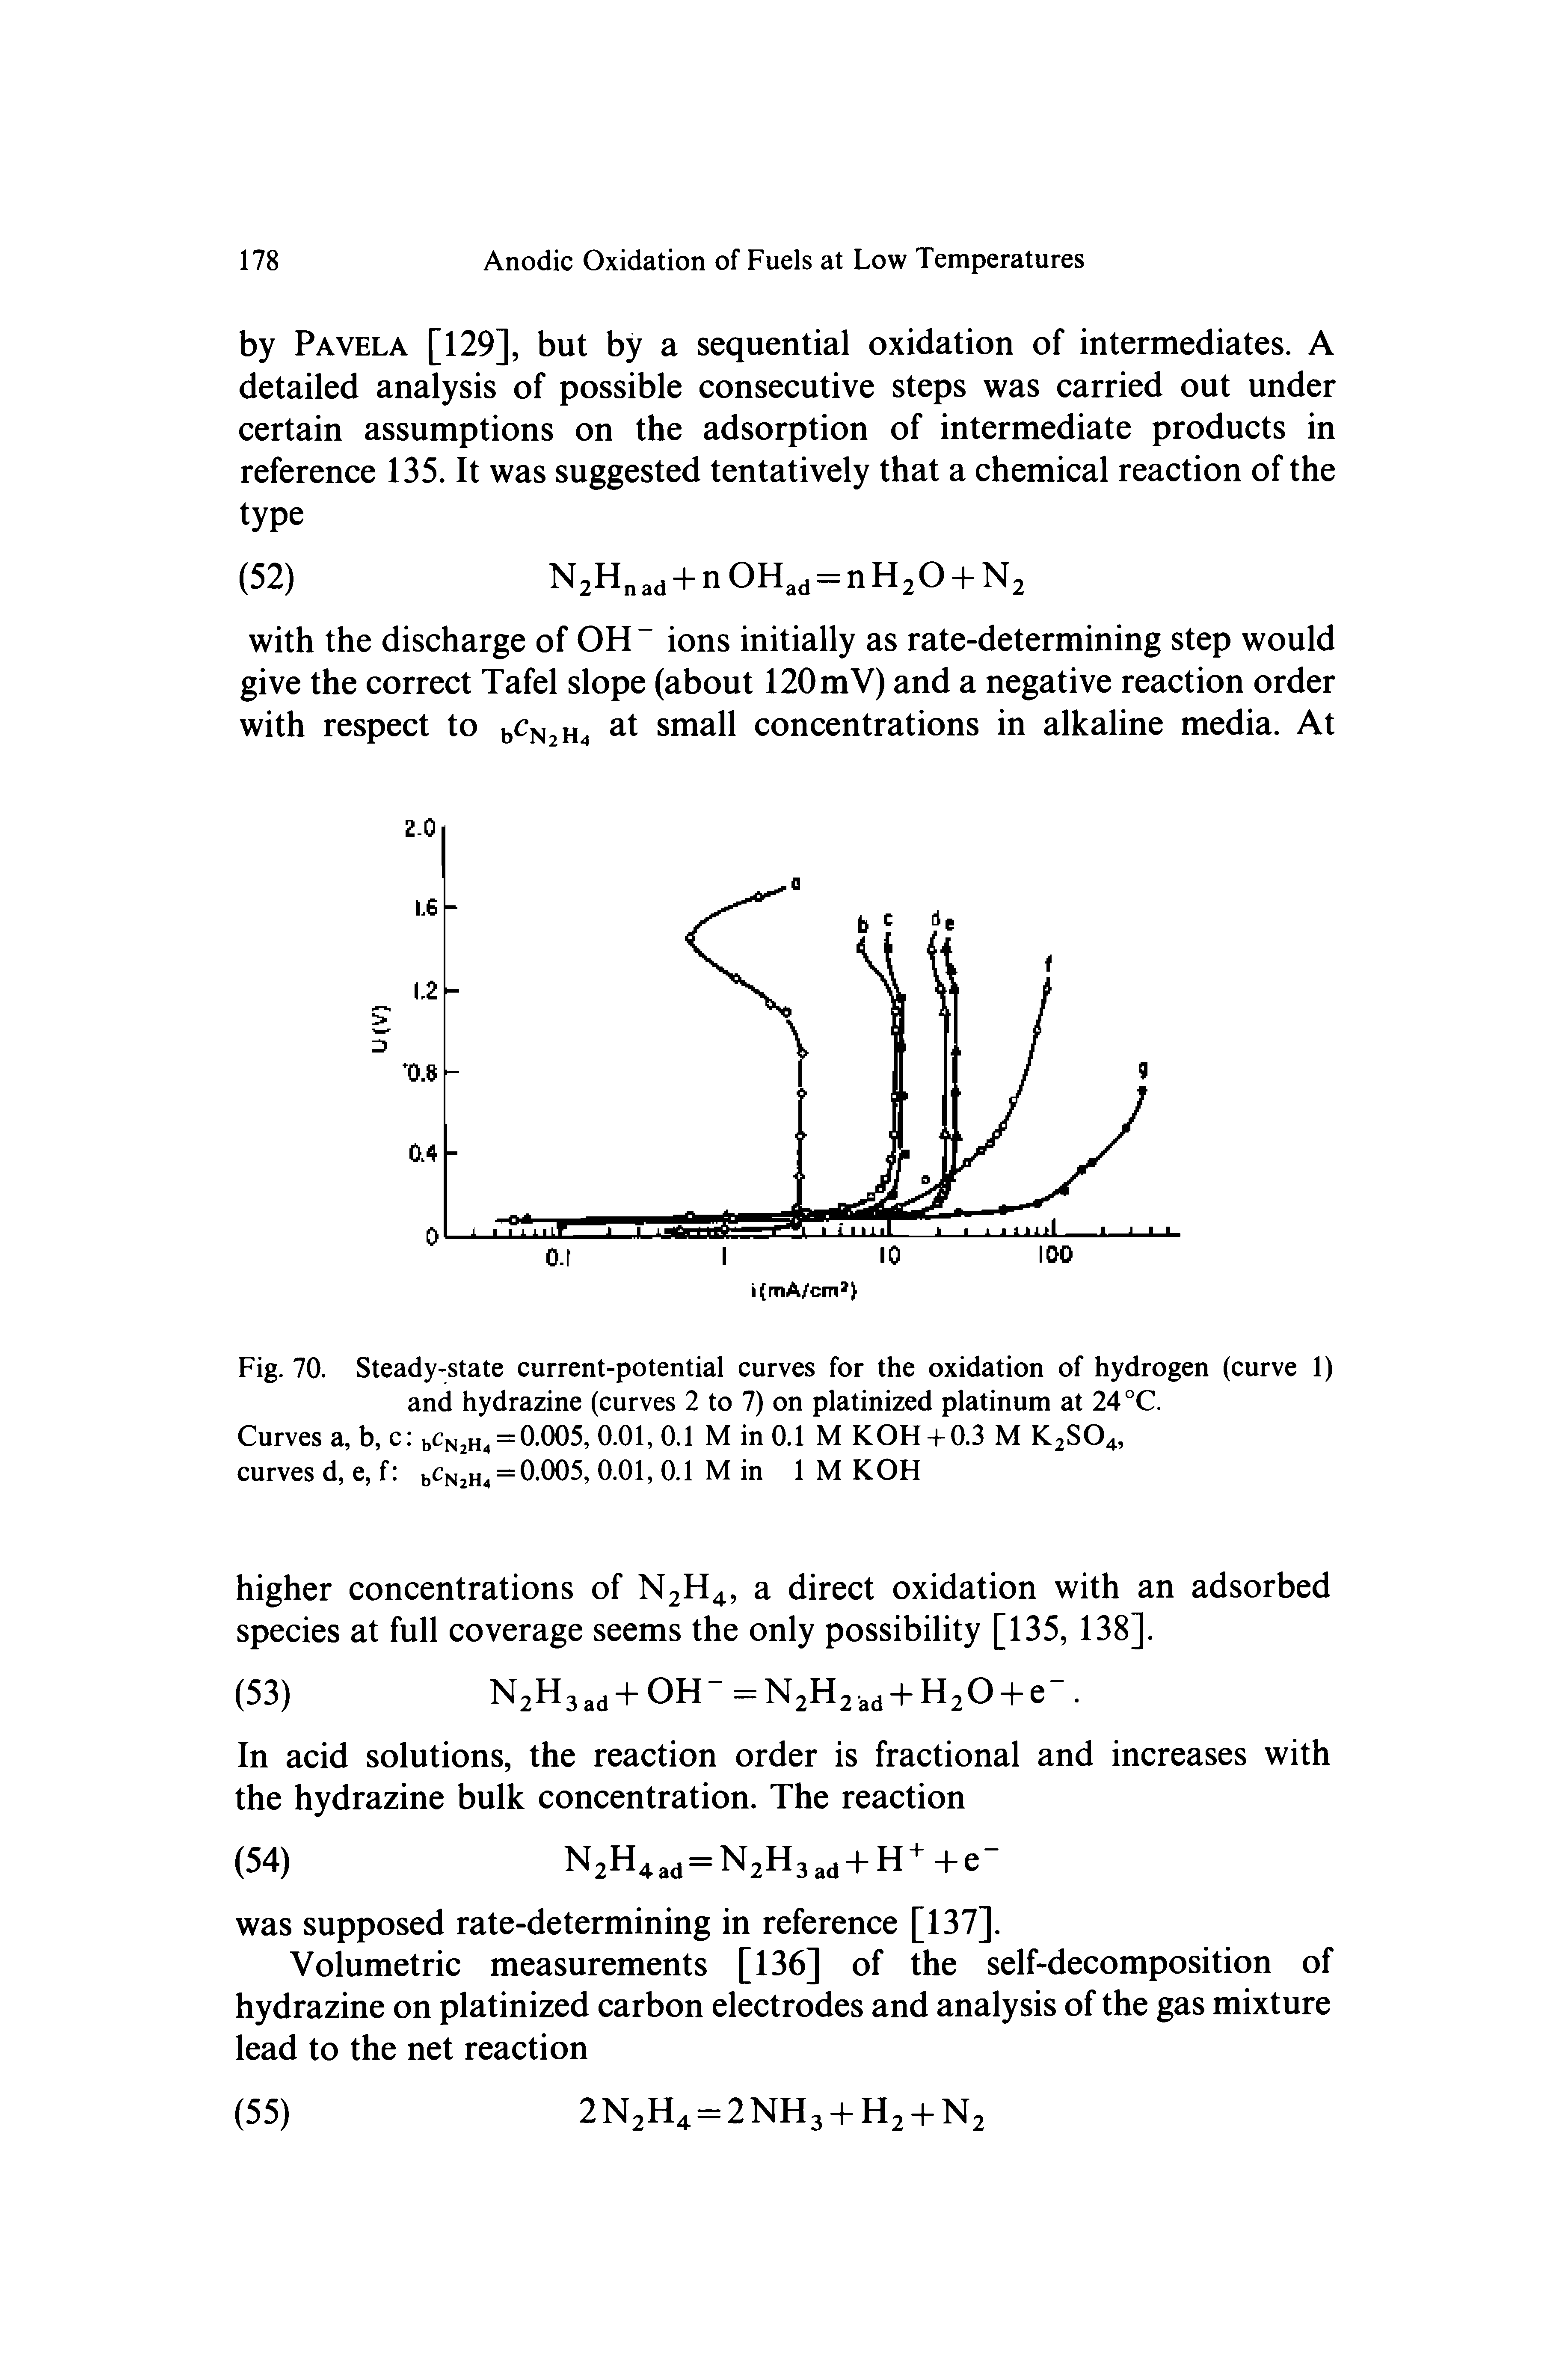 Fig. 70. Steady-state current-potential curves for the oxidation of hydrogen (curve 1) and hydrazine (curves 2 to 7) on platinized platinum at 24 °C.